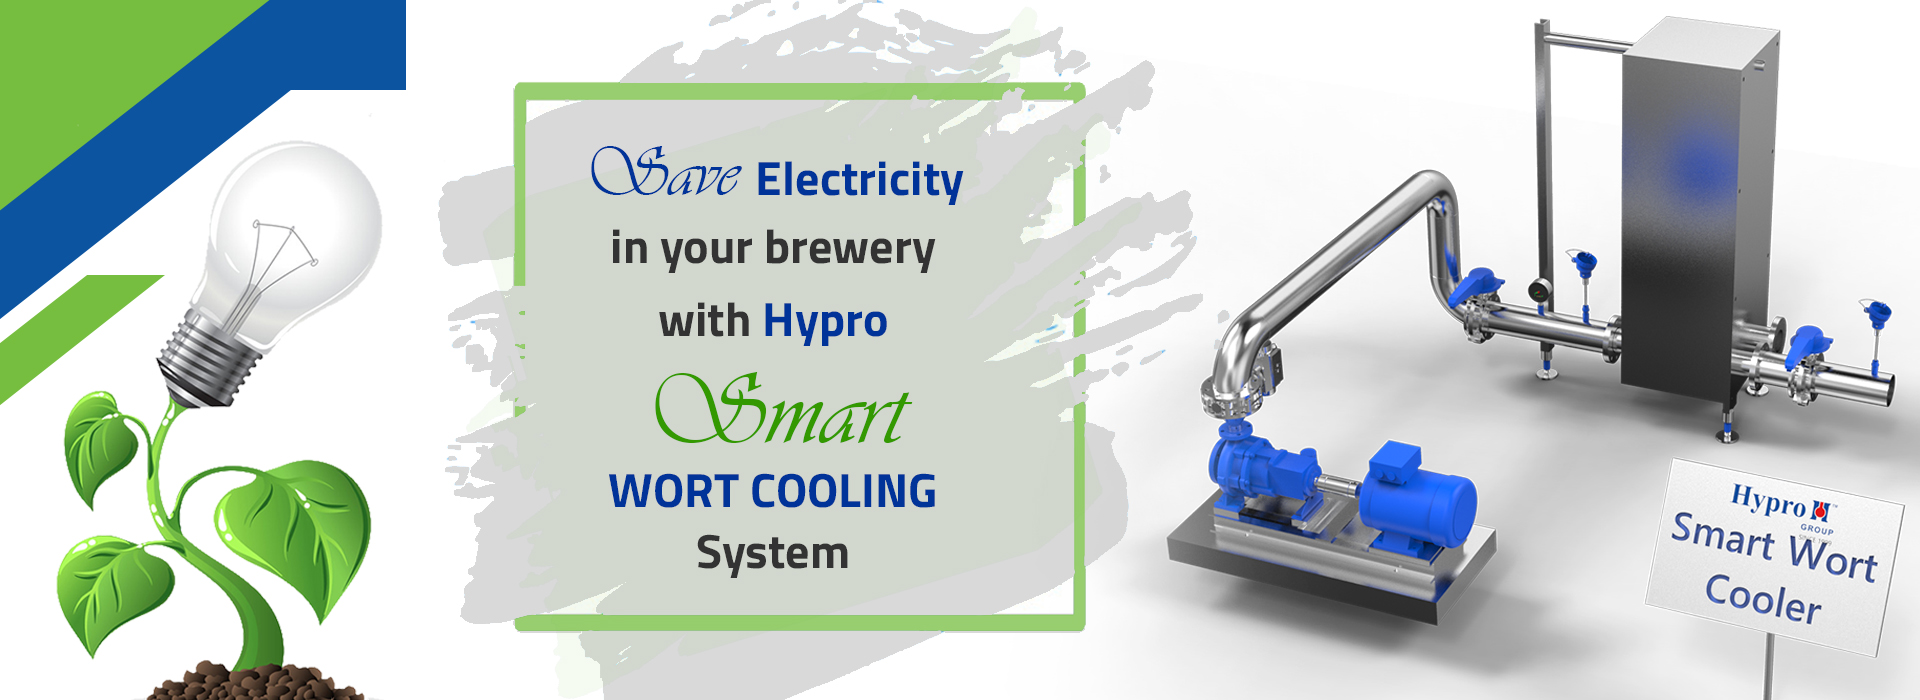 Wort Cooling Hypro